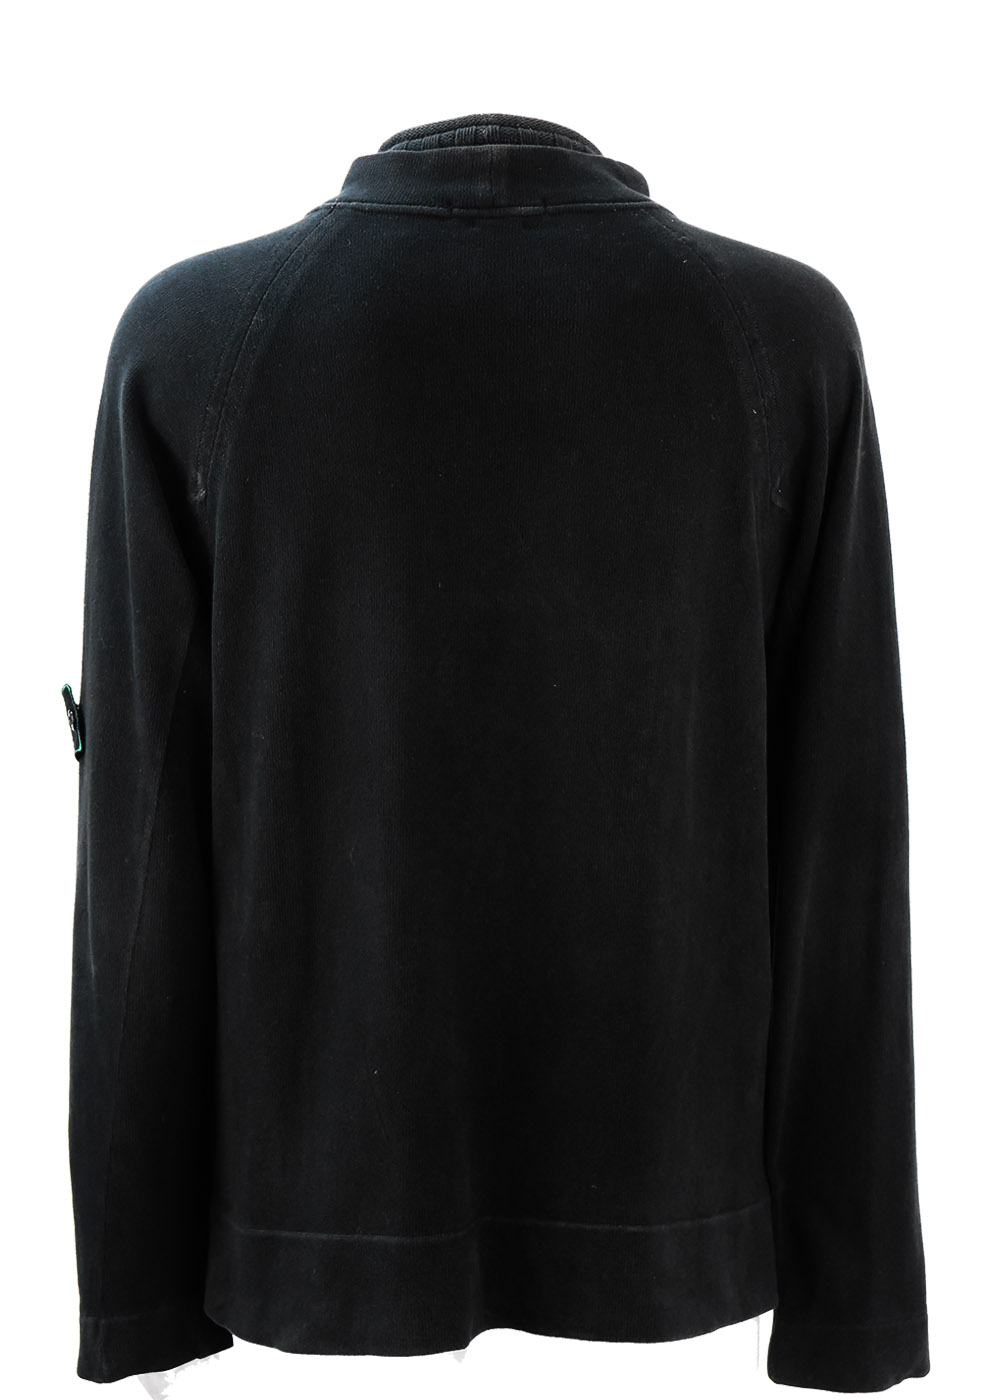 Stone Island Black Jumper with Double Layered Collar Detail - M/L ...